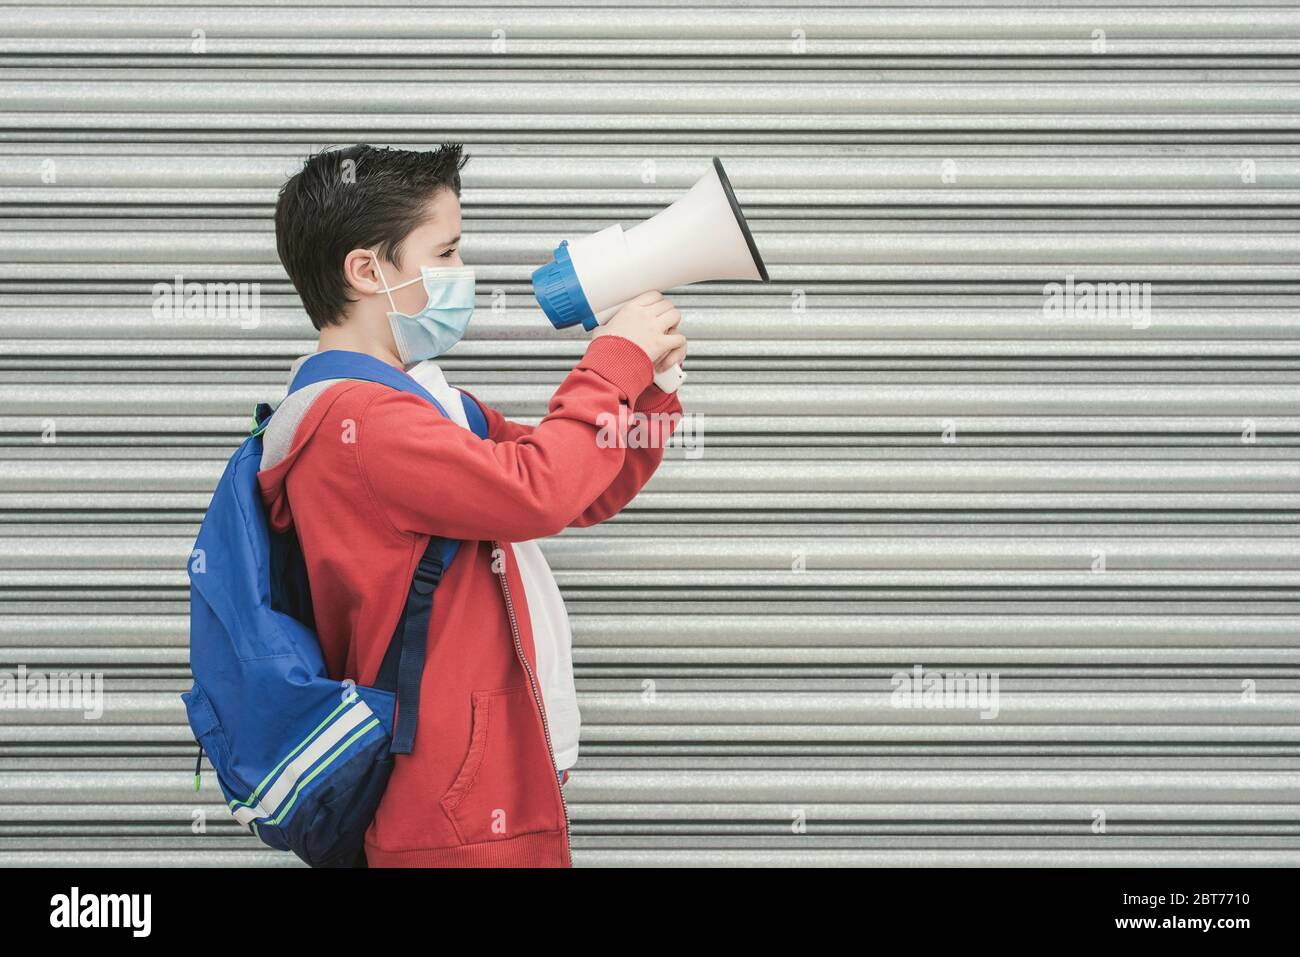 kid with medical mask and backpack screaming with megaphone back to school outdoor Stock Photo